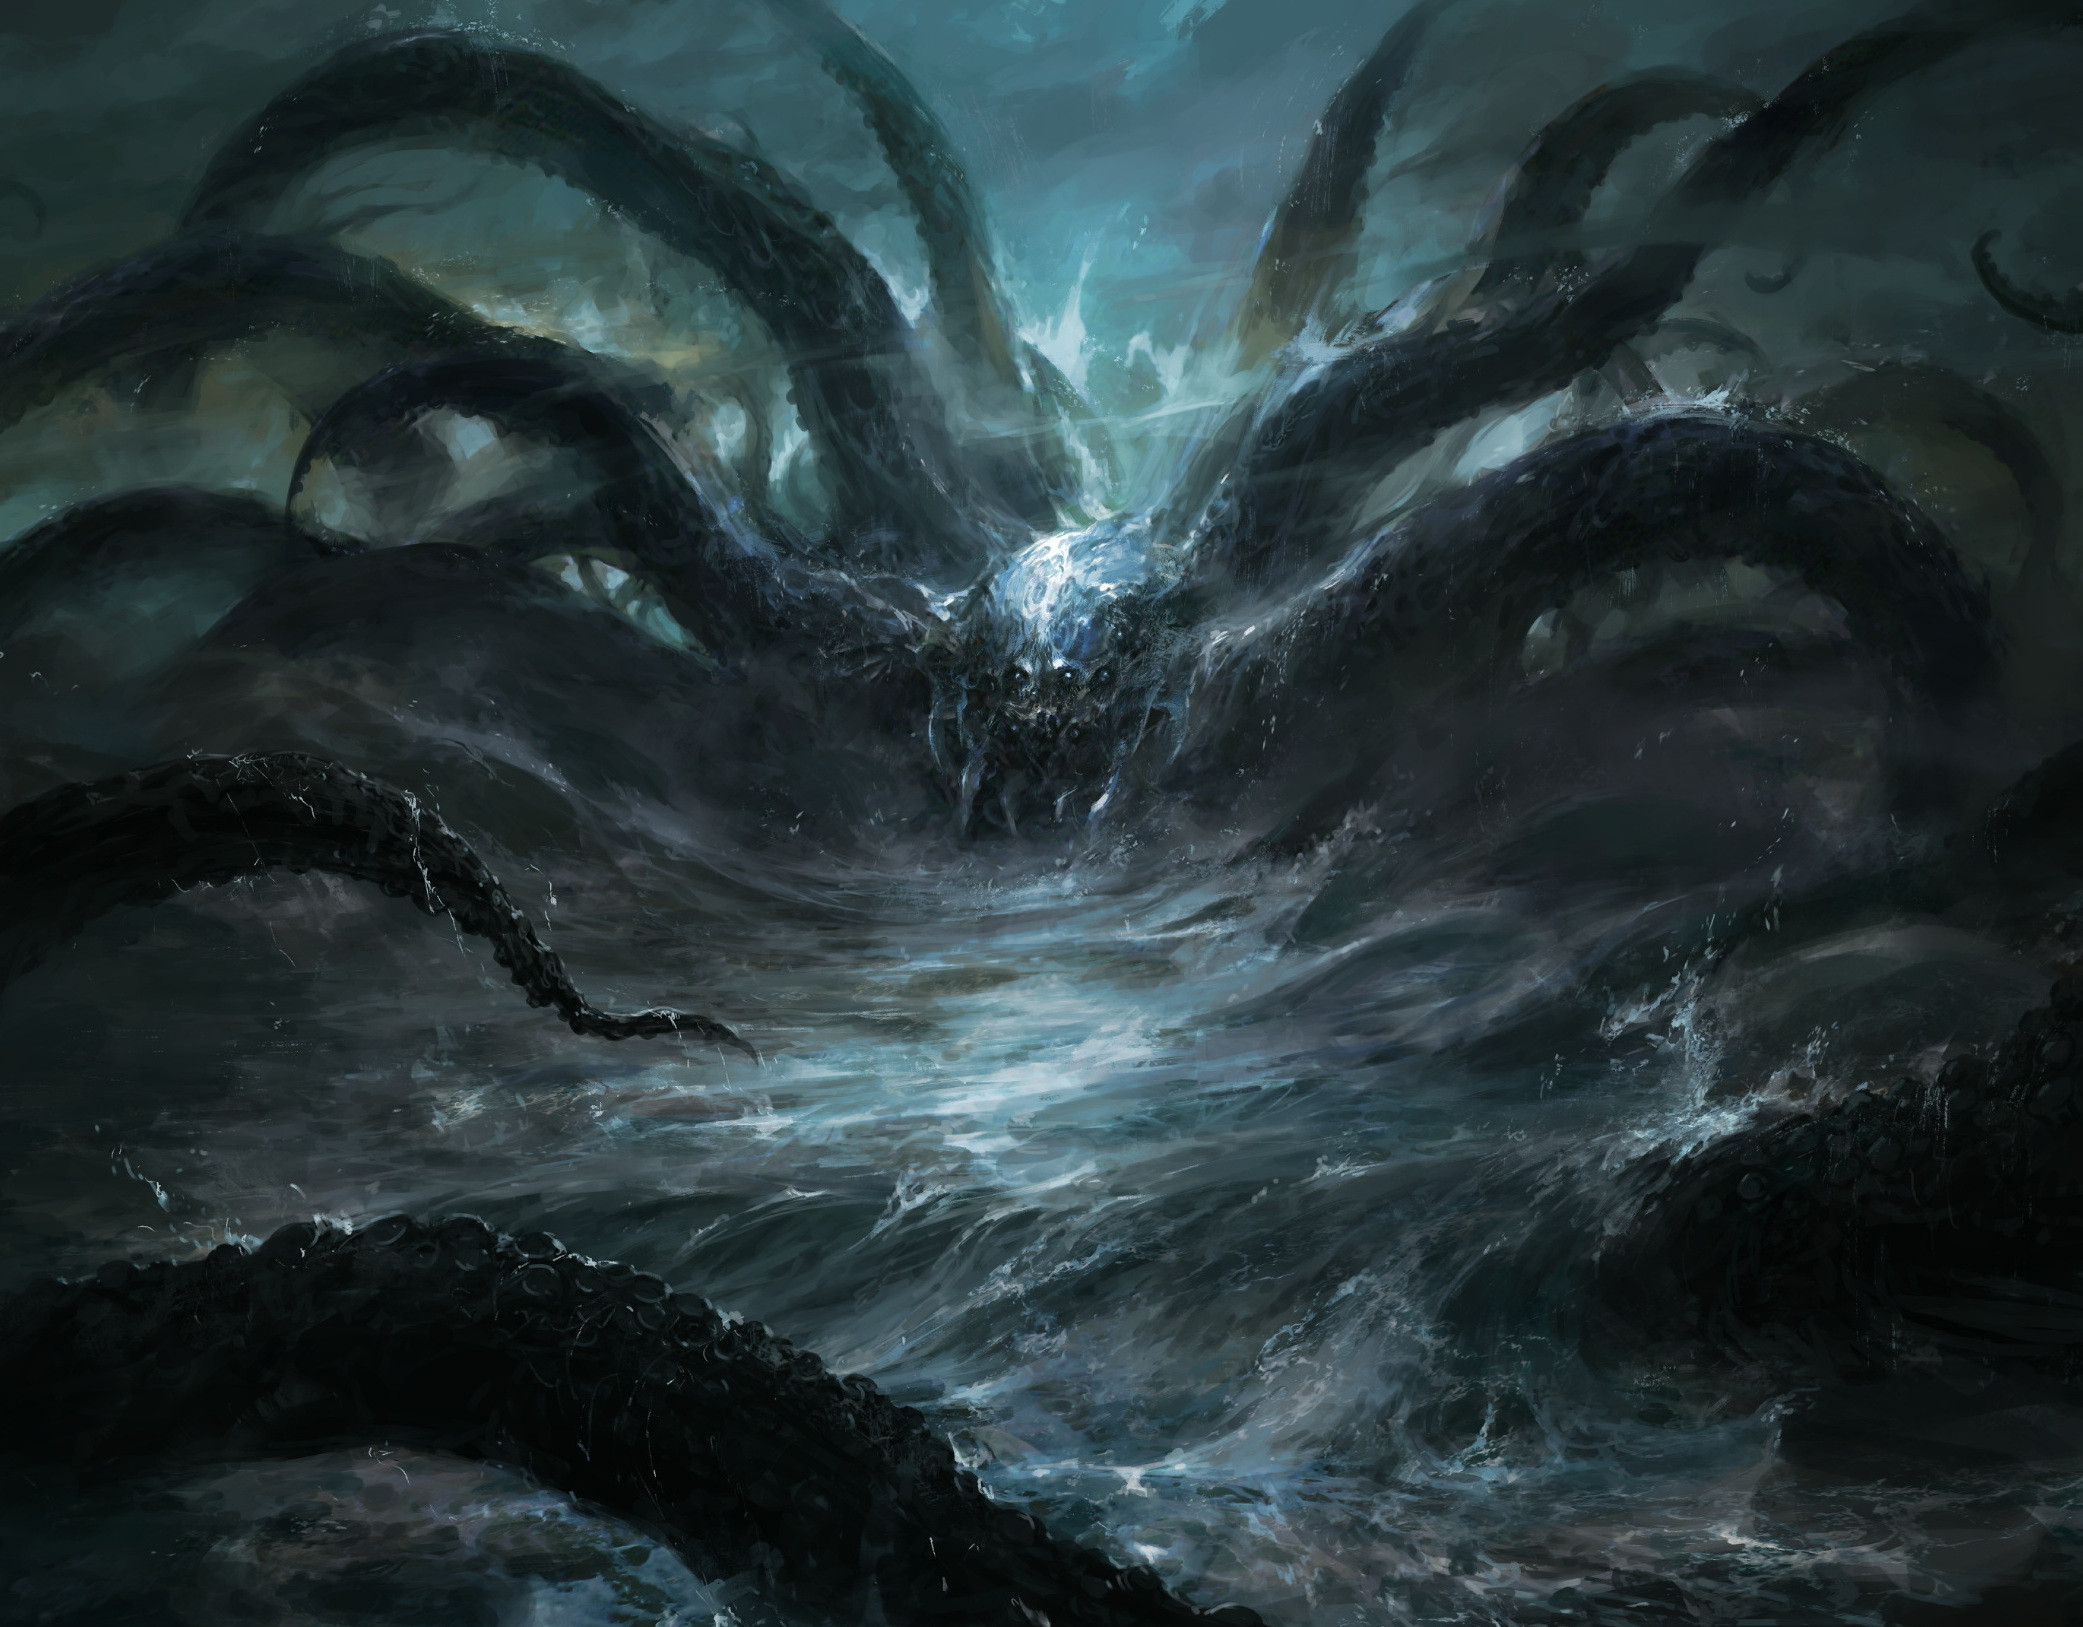 Artwork Fantasy Art Digital Art The Silmarillion Creature Chris Cold The Lord Of The Rings Water Ten 2083x1627